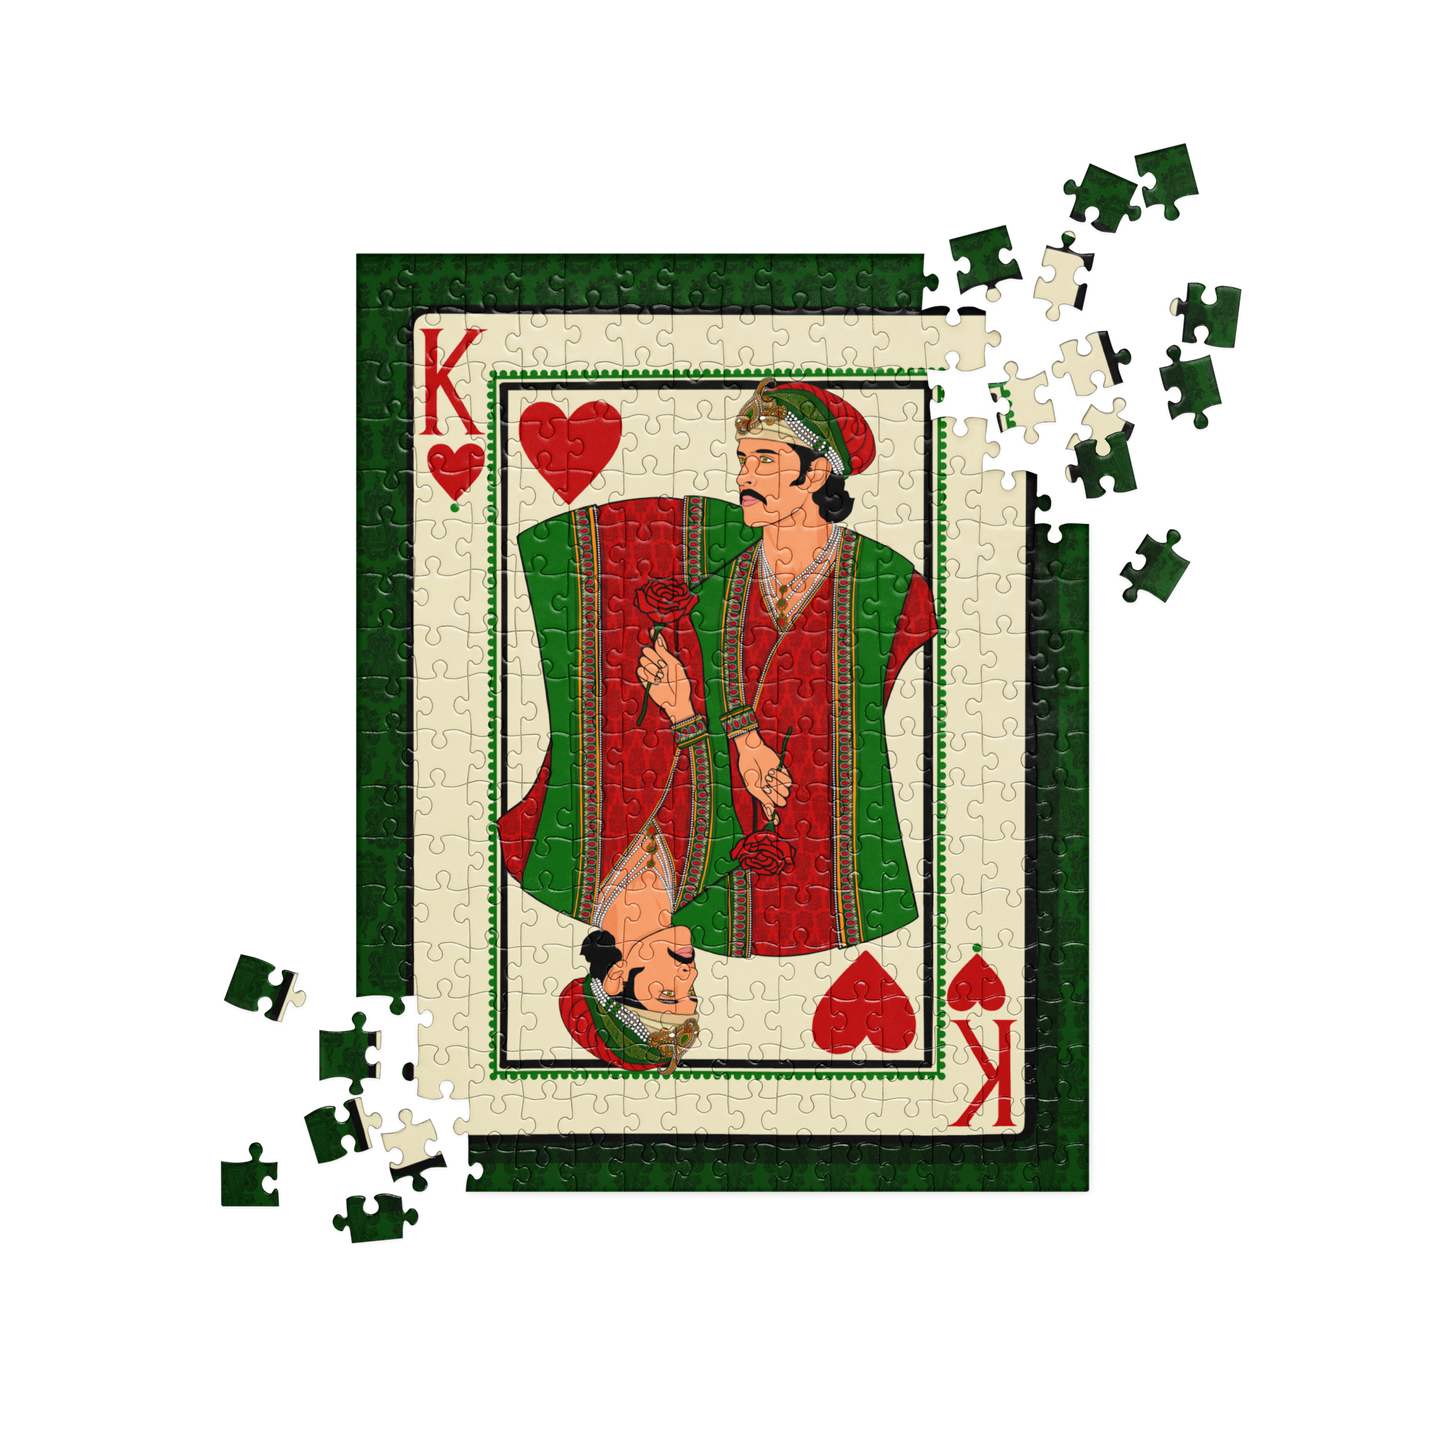 King of Hearts - Jigsaw puzzle